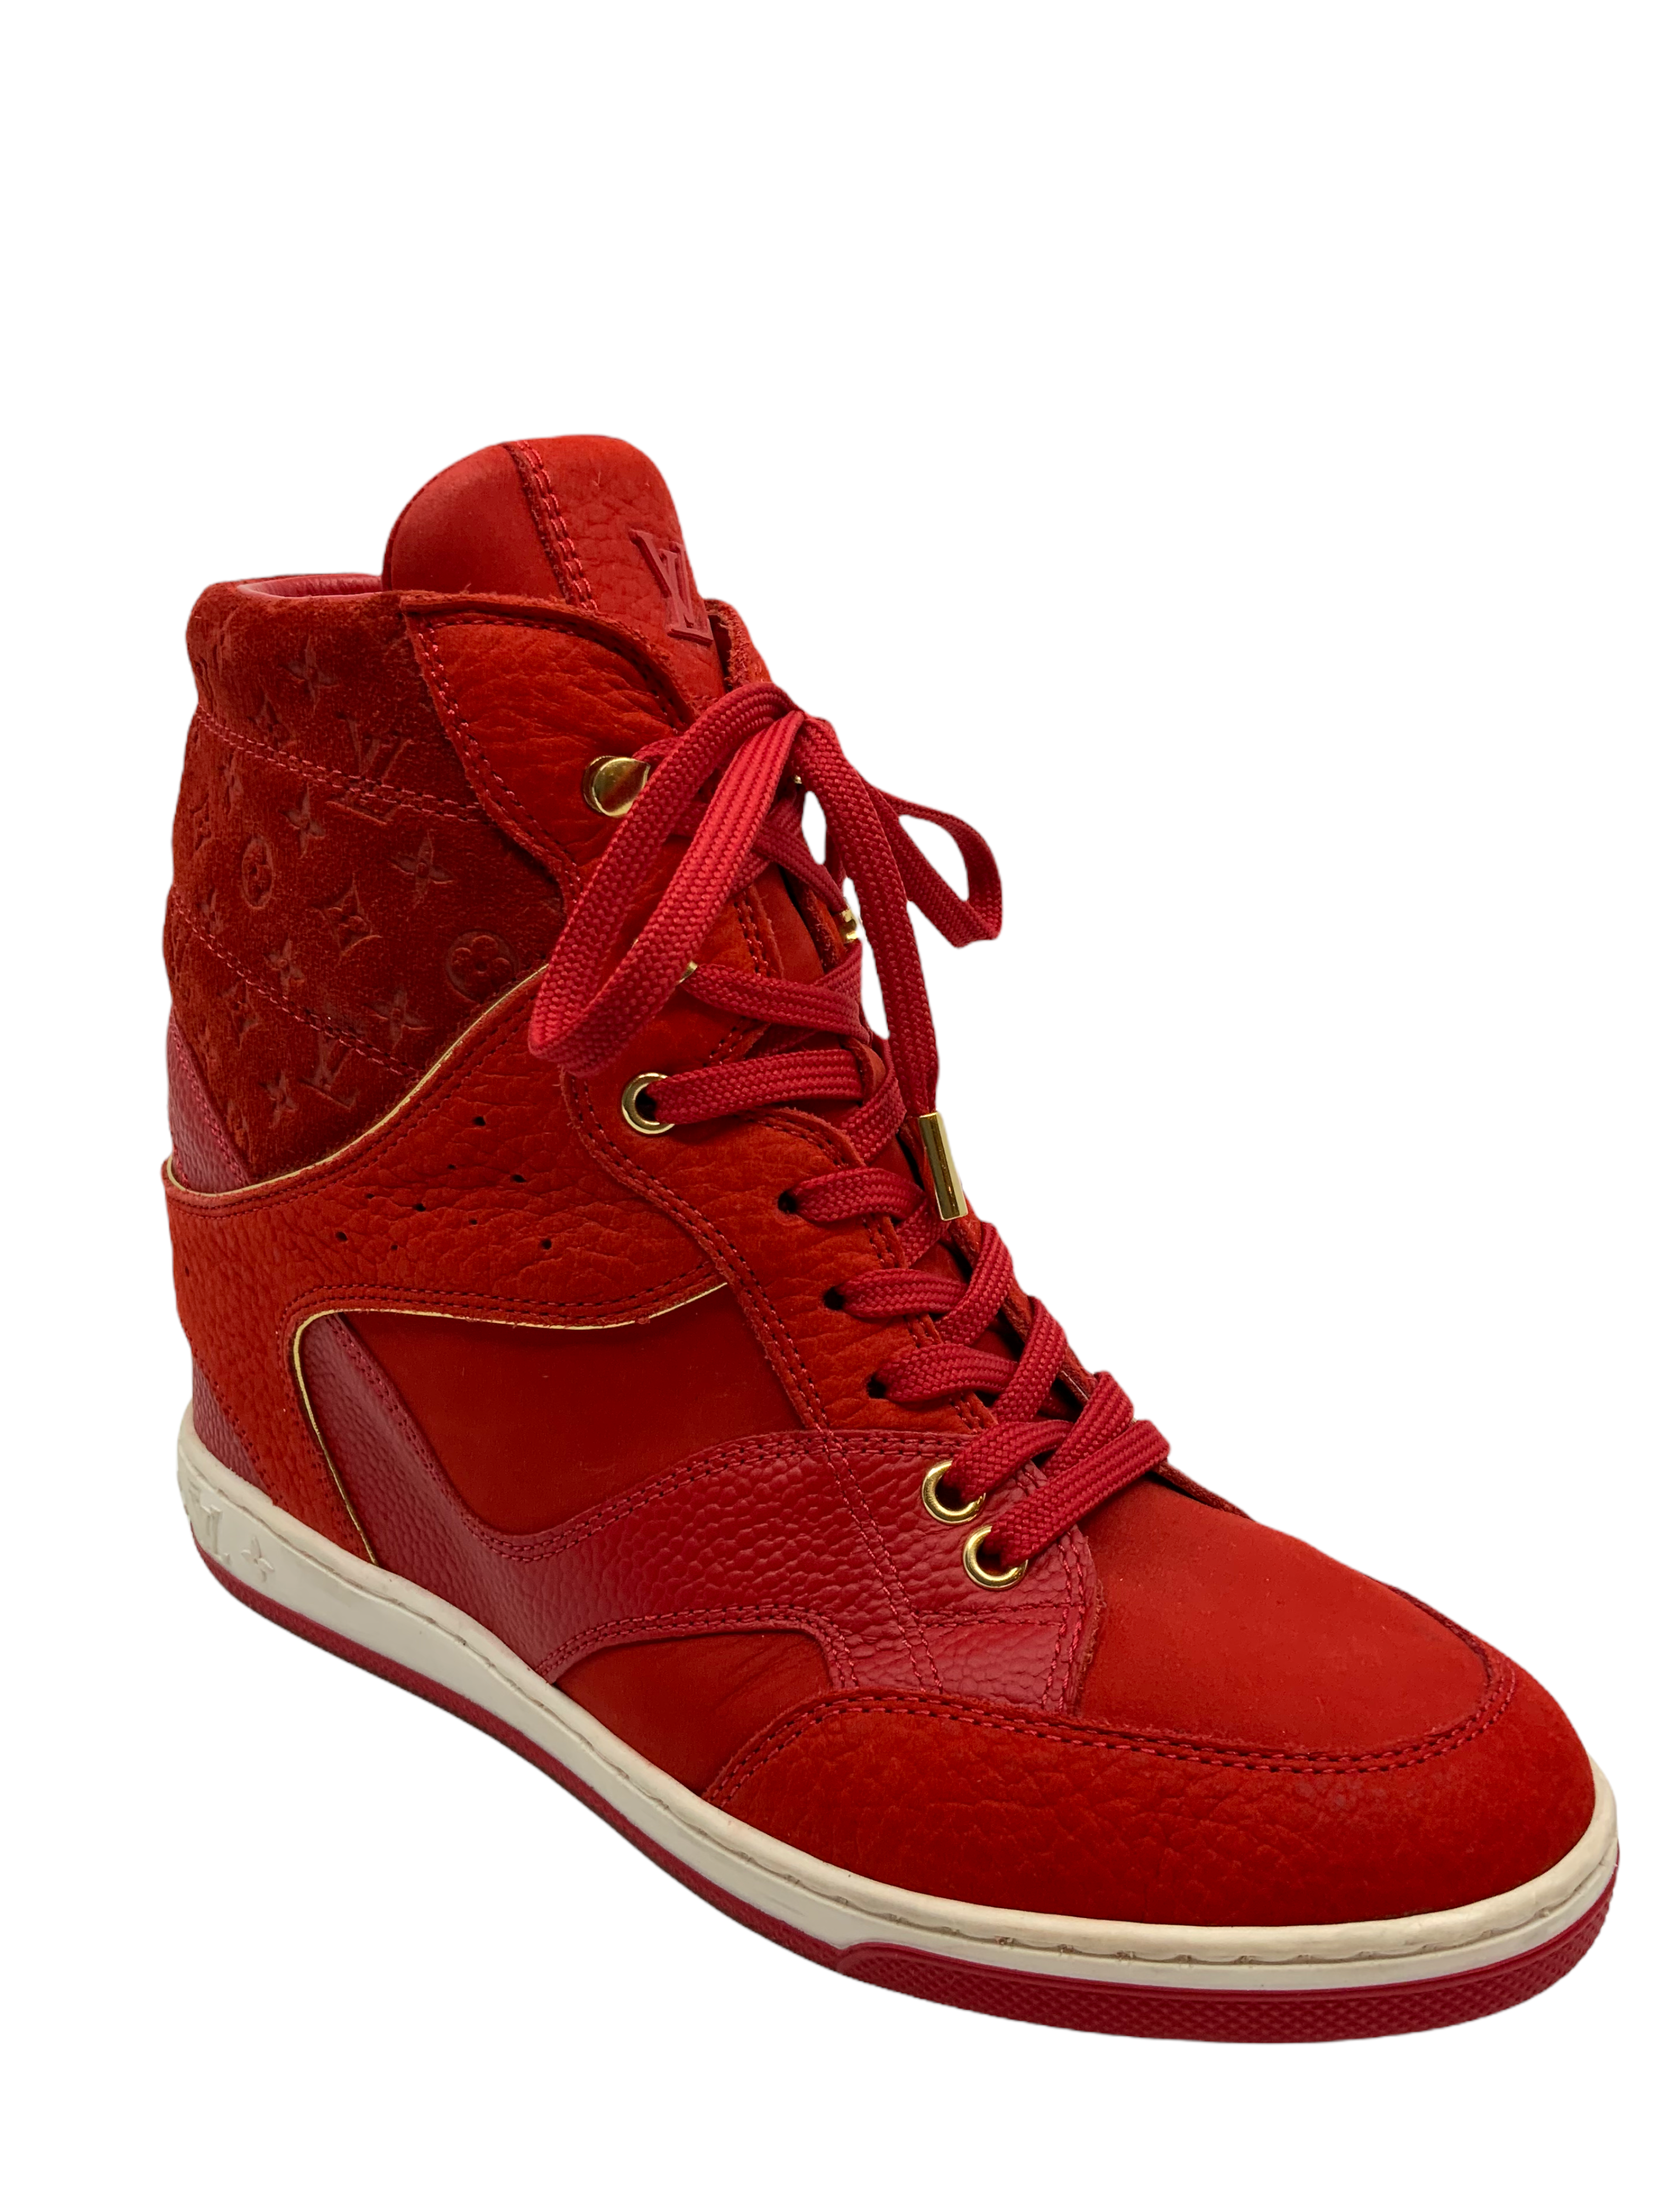 Louis Vuitton Red Leather And Embossed Monogram Suede Millenium Wedge  Sneakers Size 39.5 Louis Vuitton